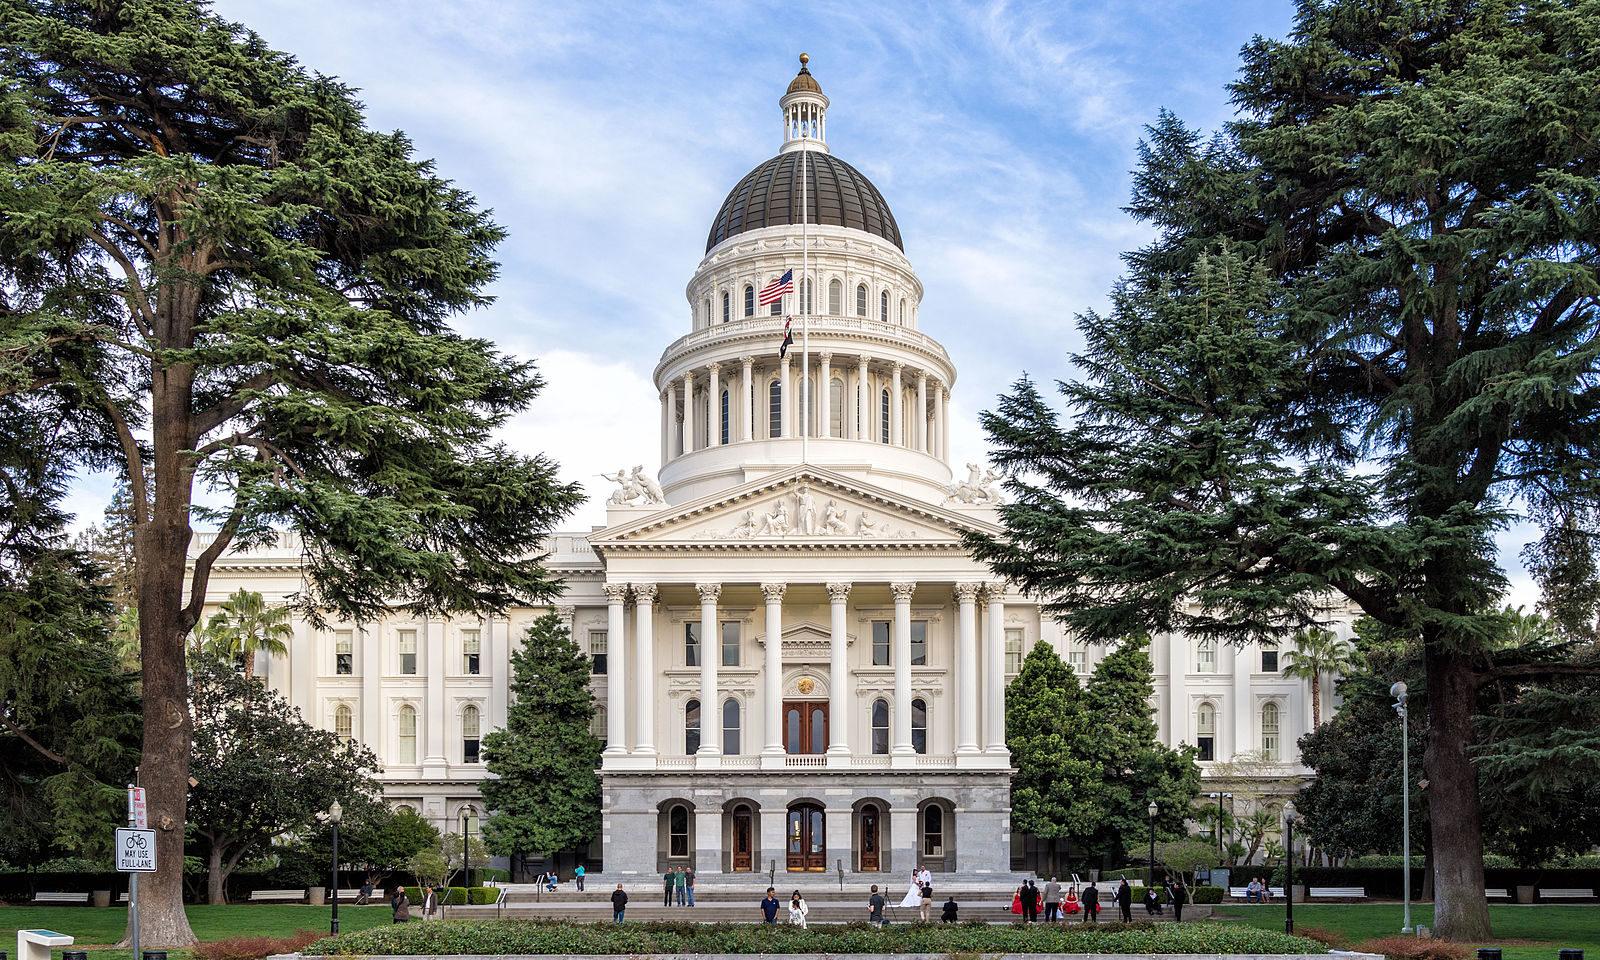 Sacramento, View of California State Capitol from 10th Street. (Andre m via https://creativecommons.org/licenses/by-sa/3.0/deed.en)